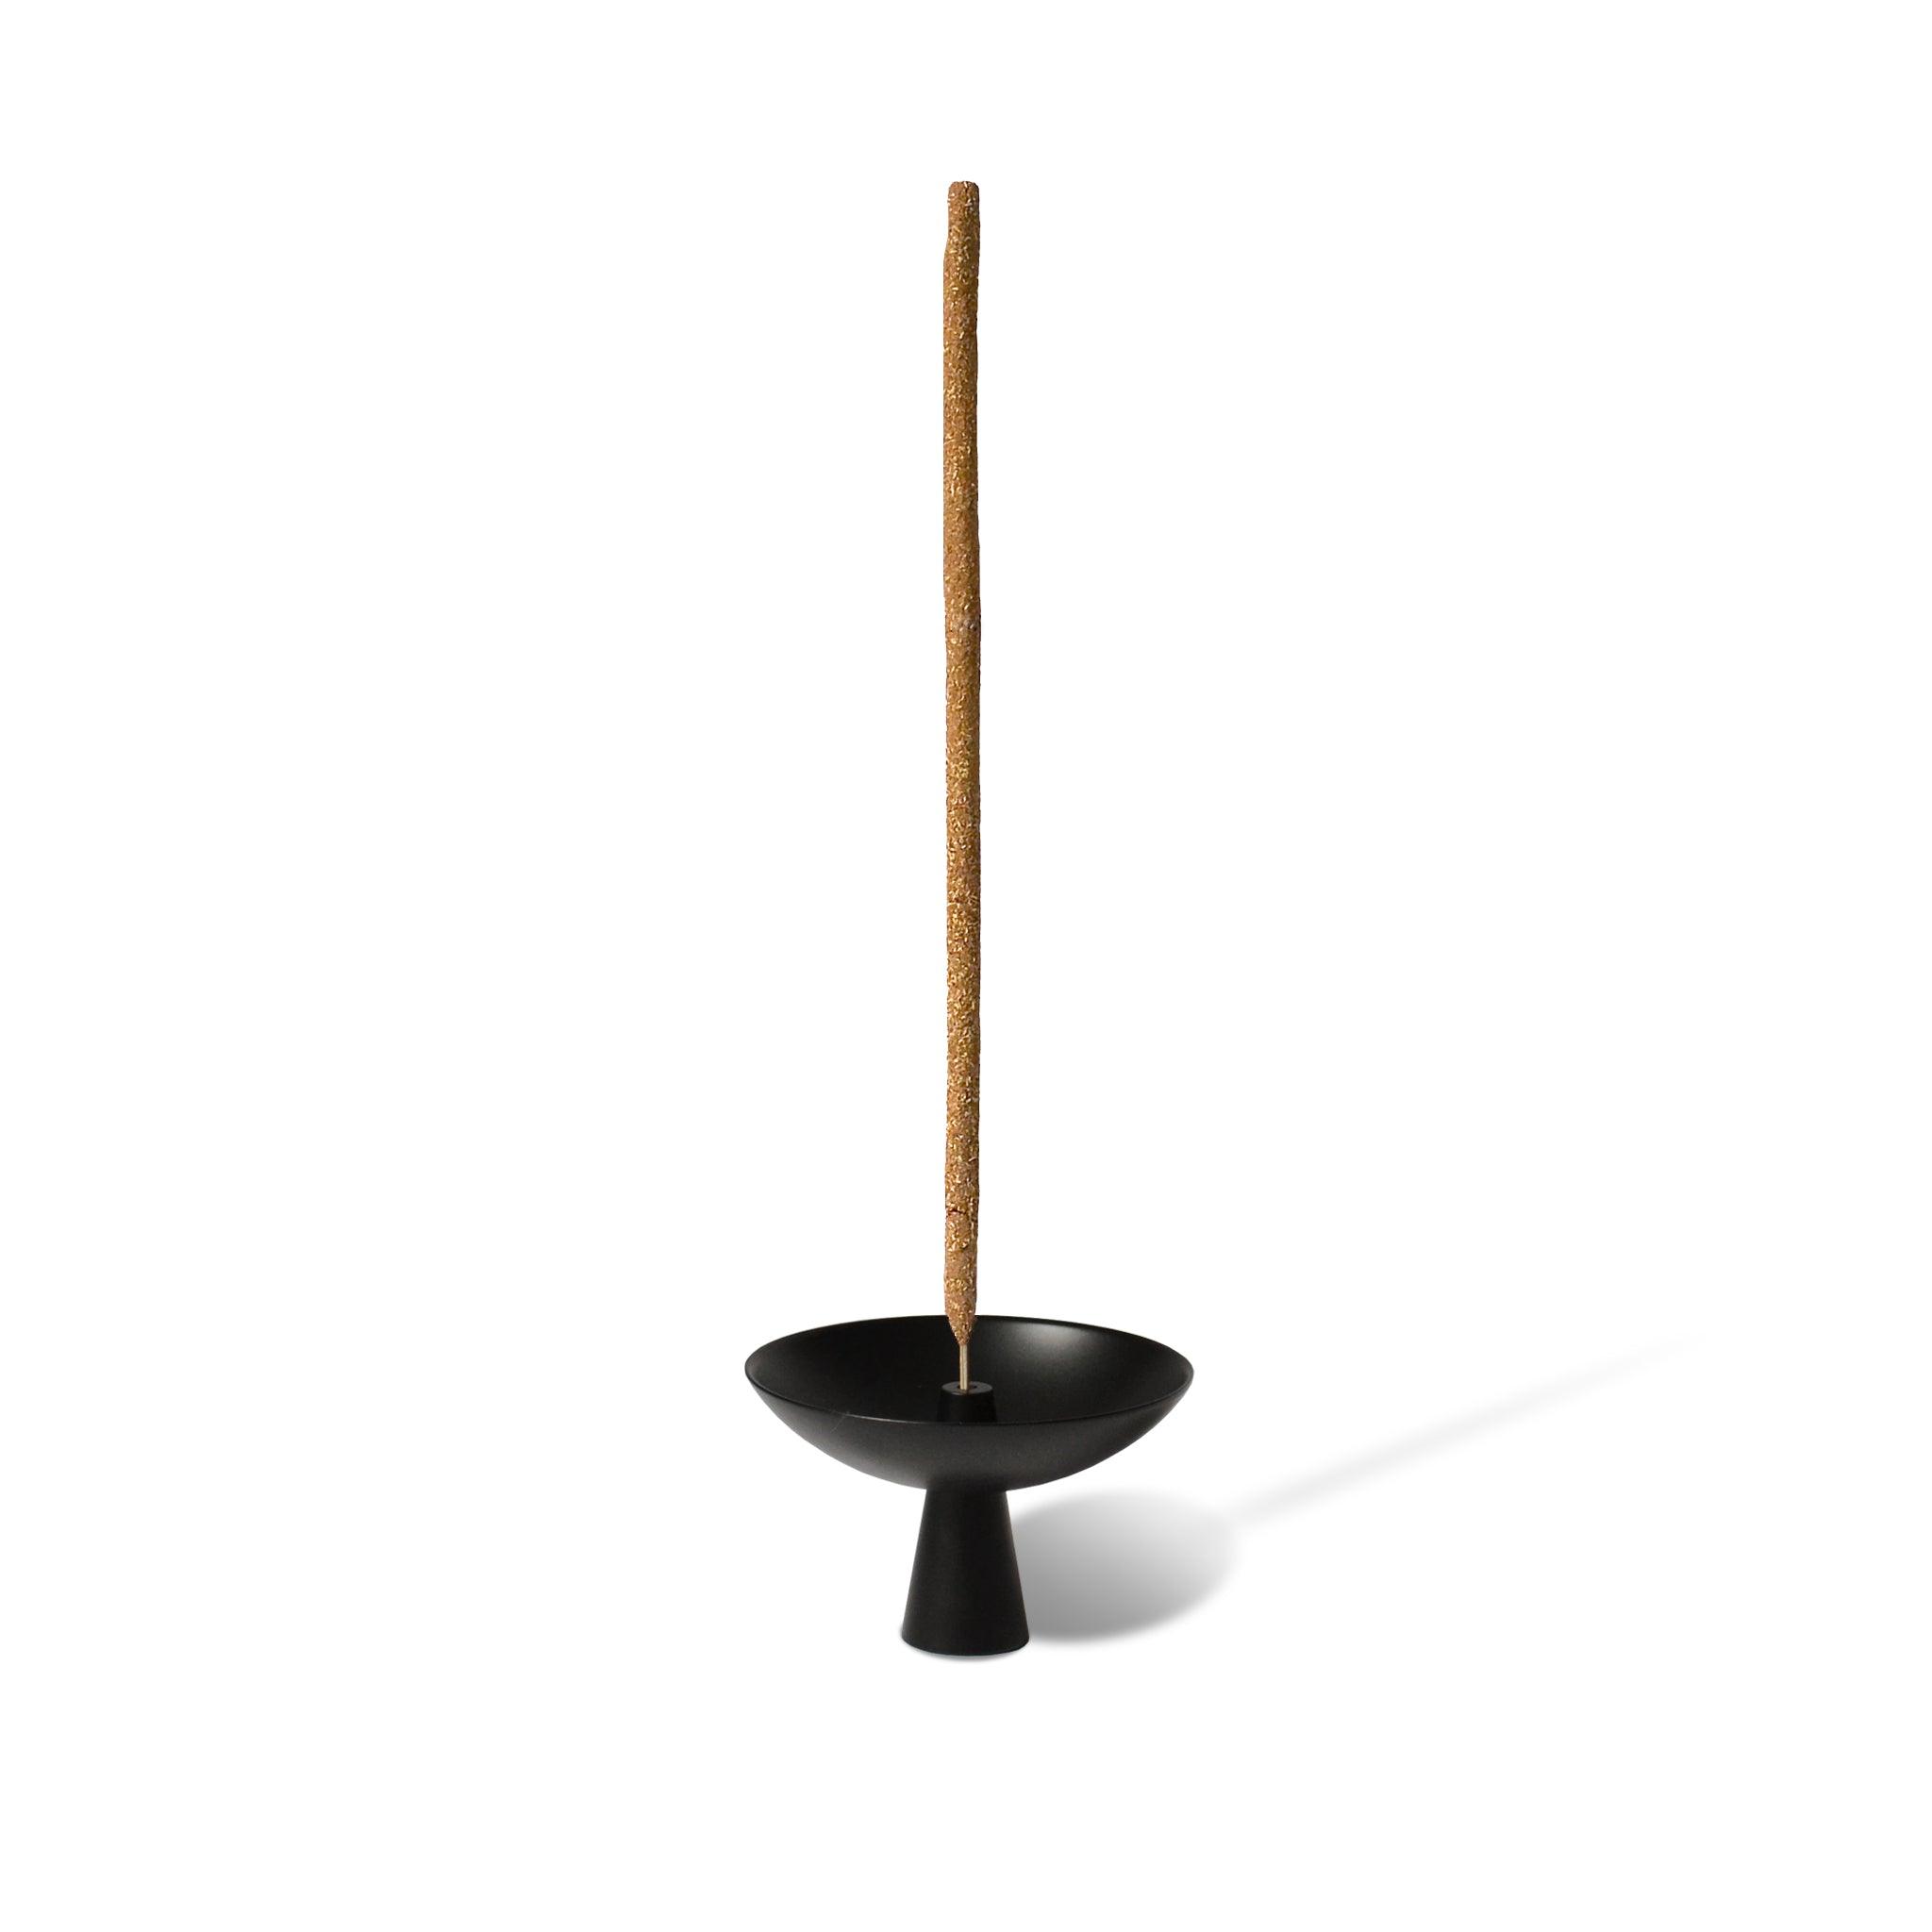 an incense stick and incense holder with black coated brass incense ash catcher